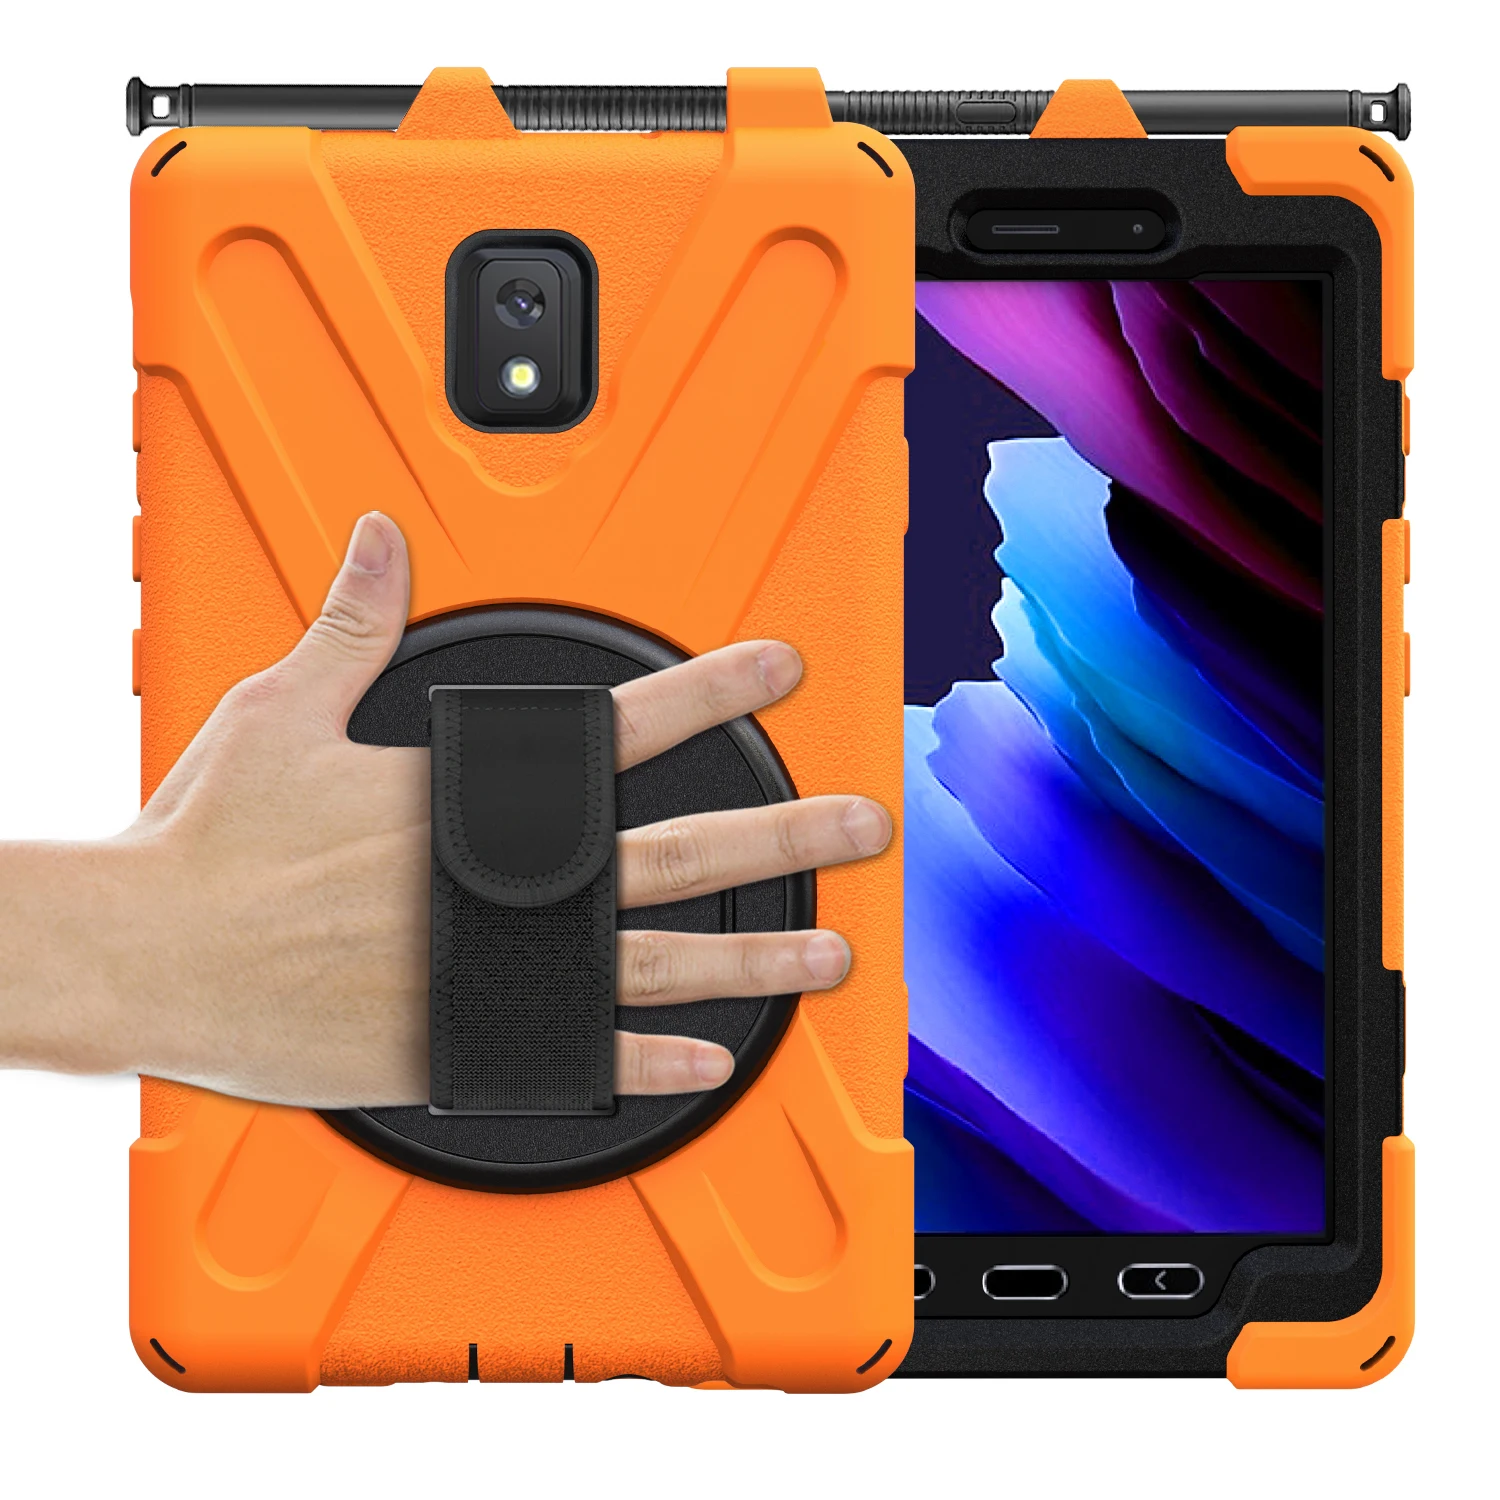 Samsung Galaxy Tab Active 3 8.0 SM-T570 T575 T577 Case Tablet Heavy Duty Rugged Shockproof Cover For Samsung Tab Active3 SM-T570 images - 6